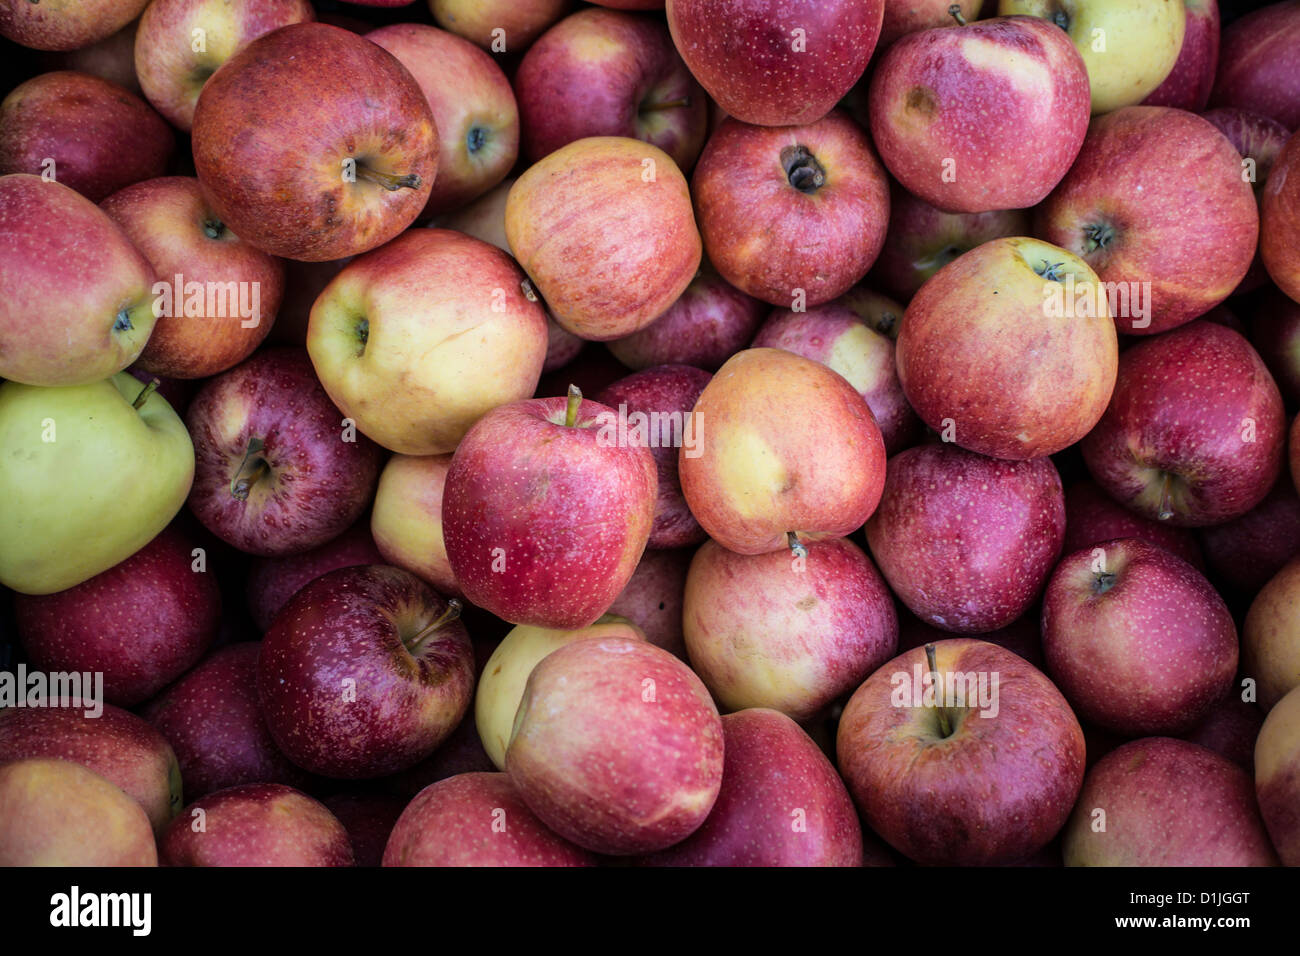 Gala is a clonally propagated apple with a mild and sweet flavor Stock Photo